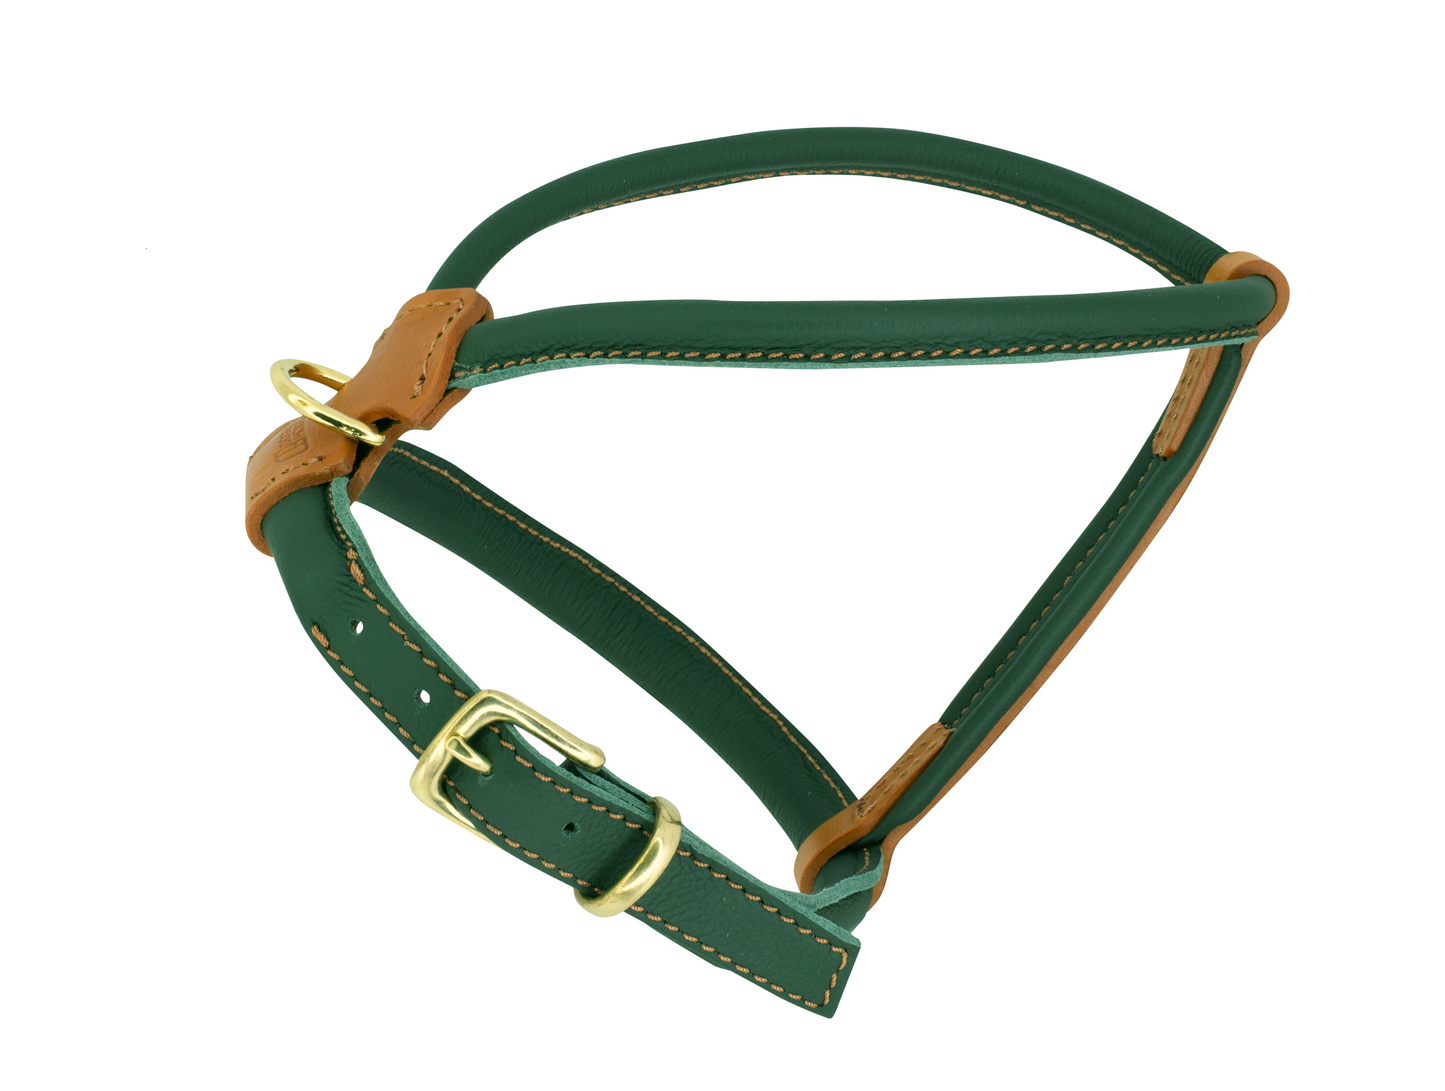 Whippet Leather Dog Harness